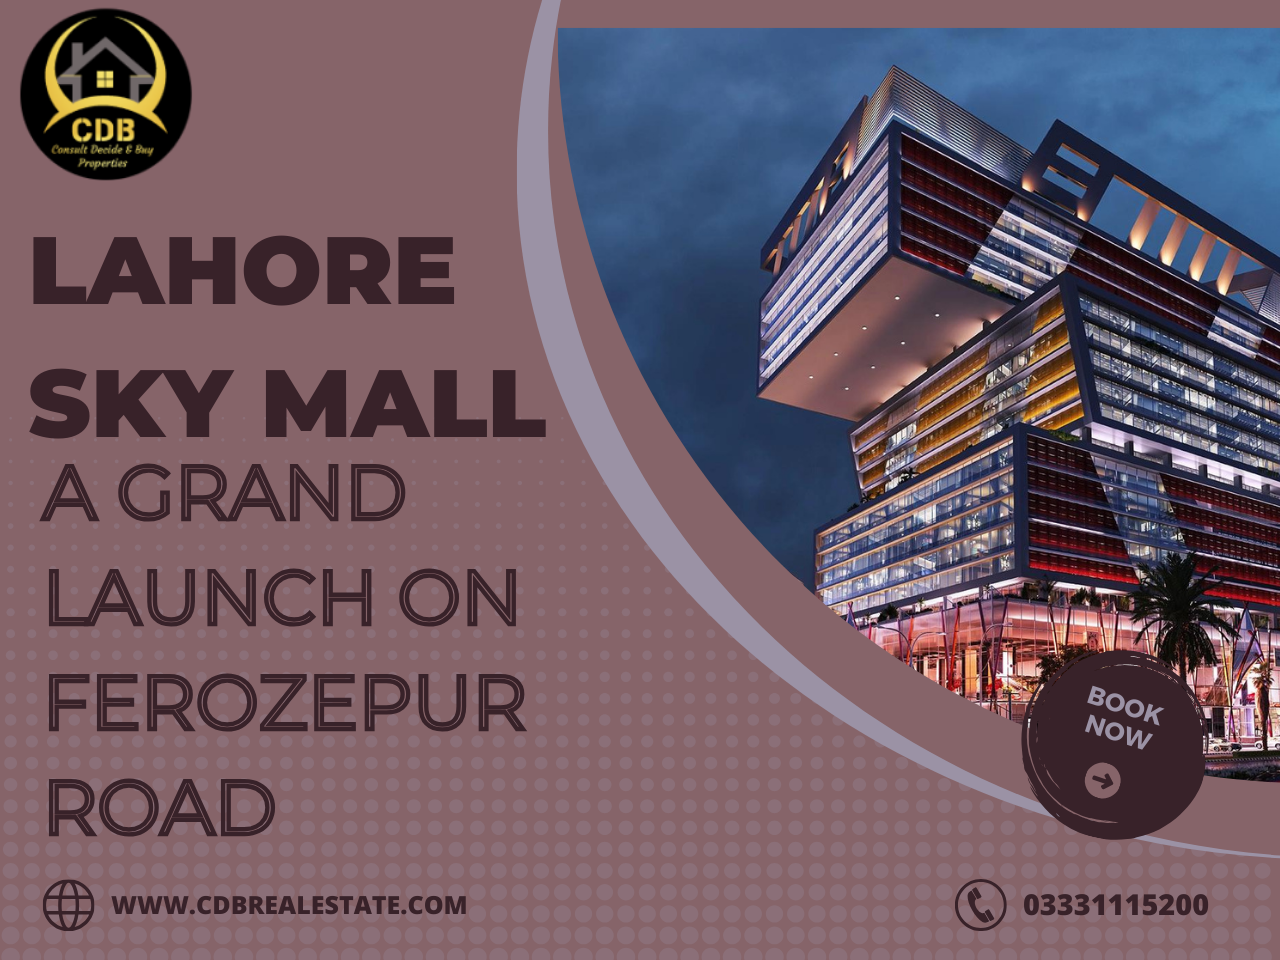 Lahore Sky Mall: A Grand Launch on Ferozepur Road